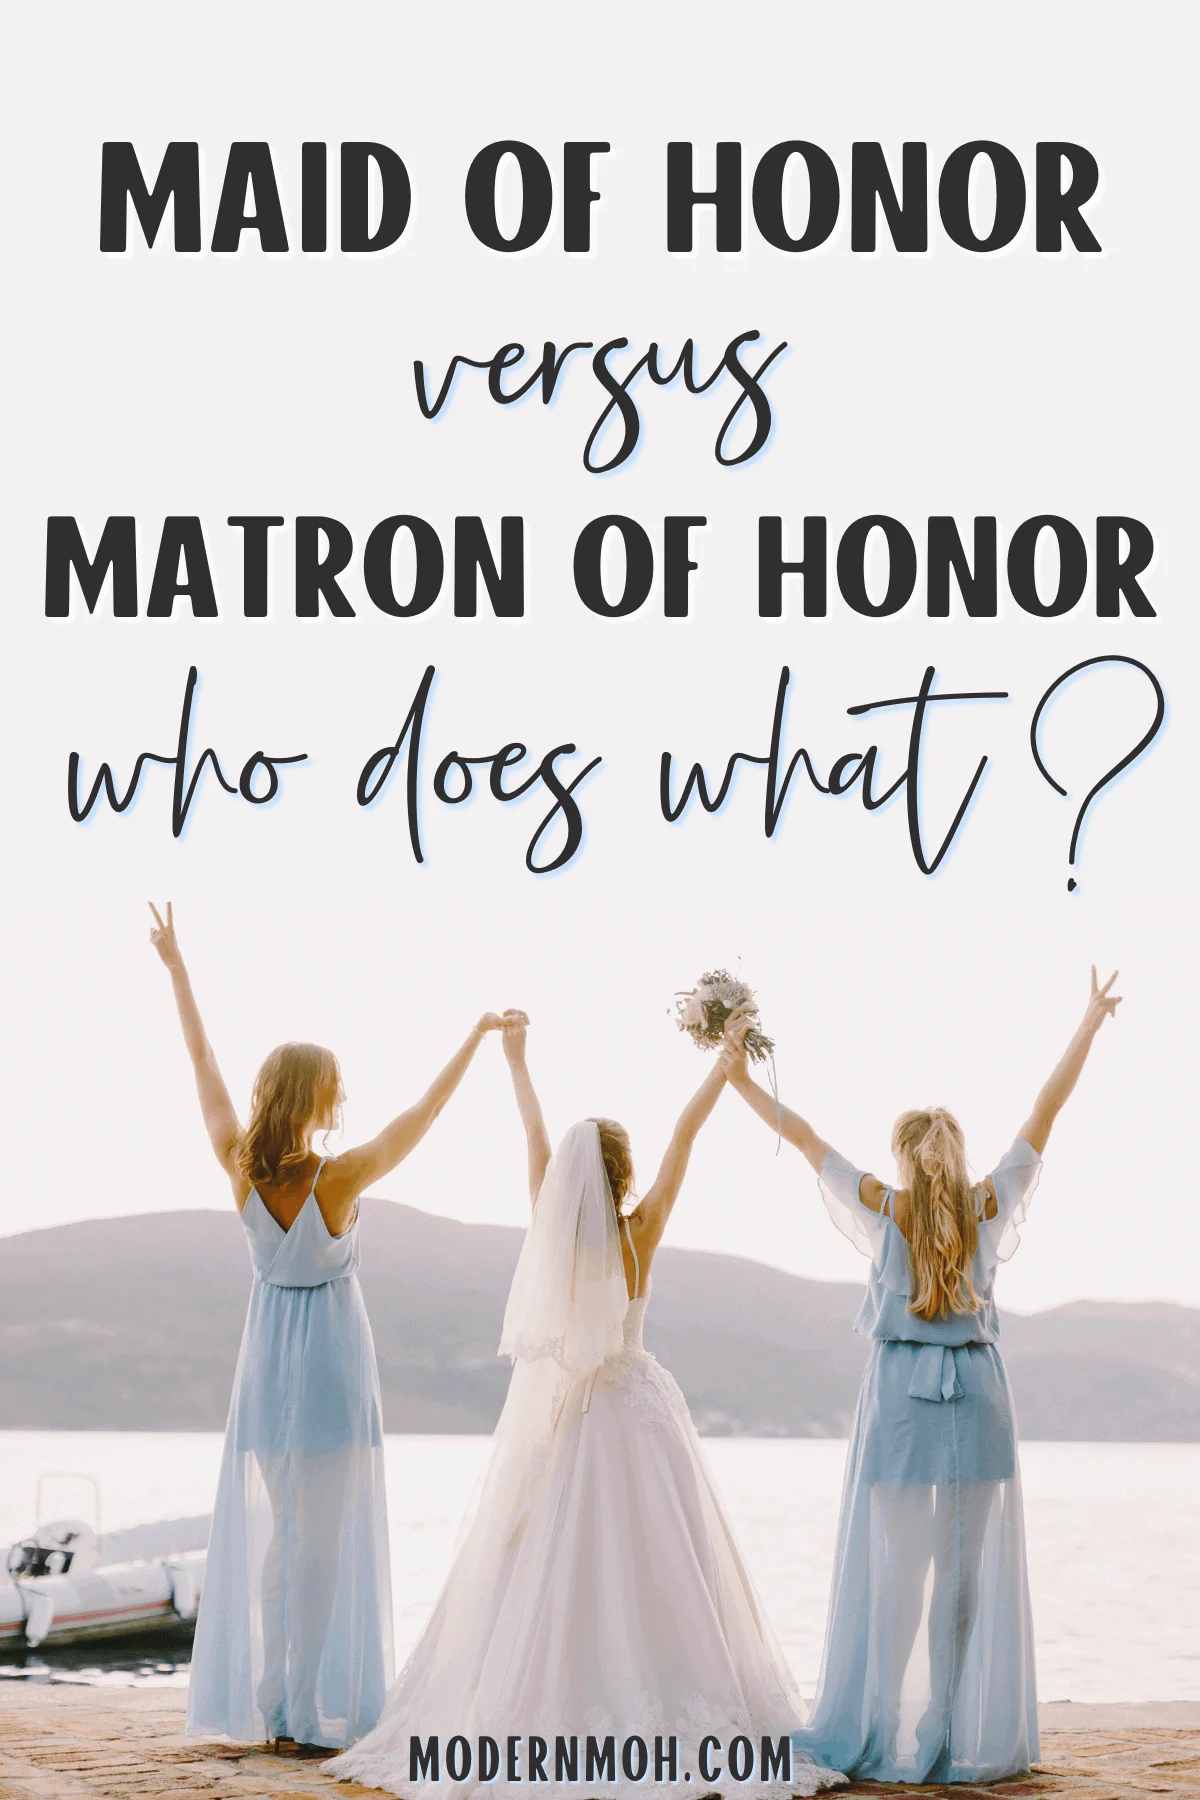 Maid of Honor vs Matron of Honor: Who Does What?